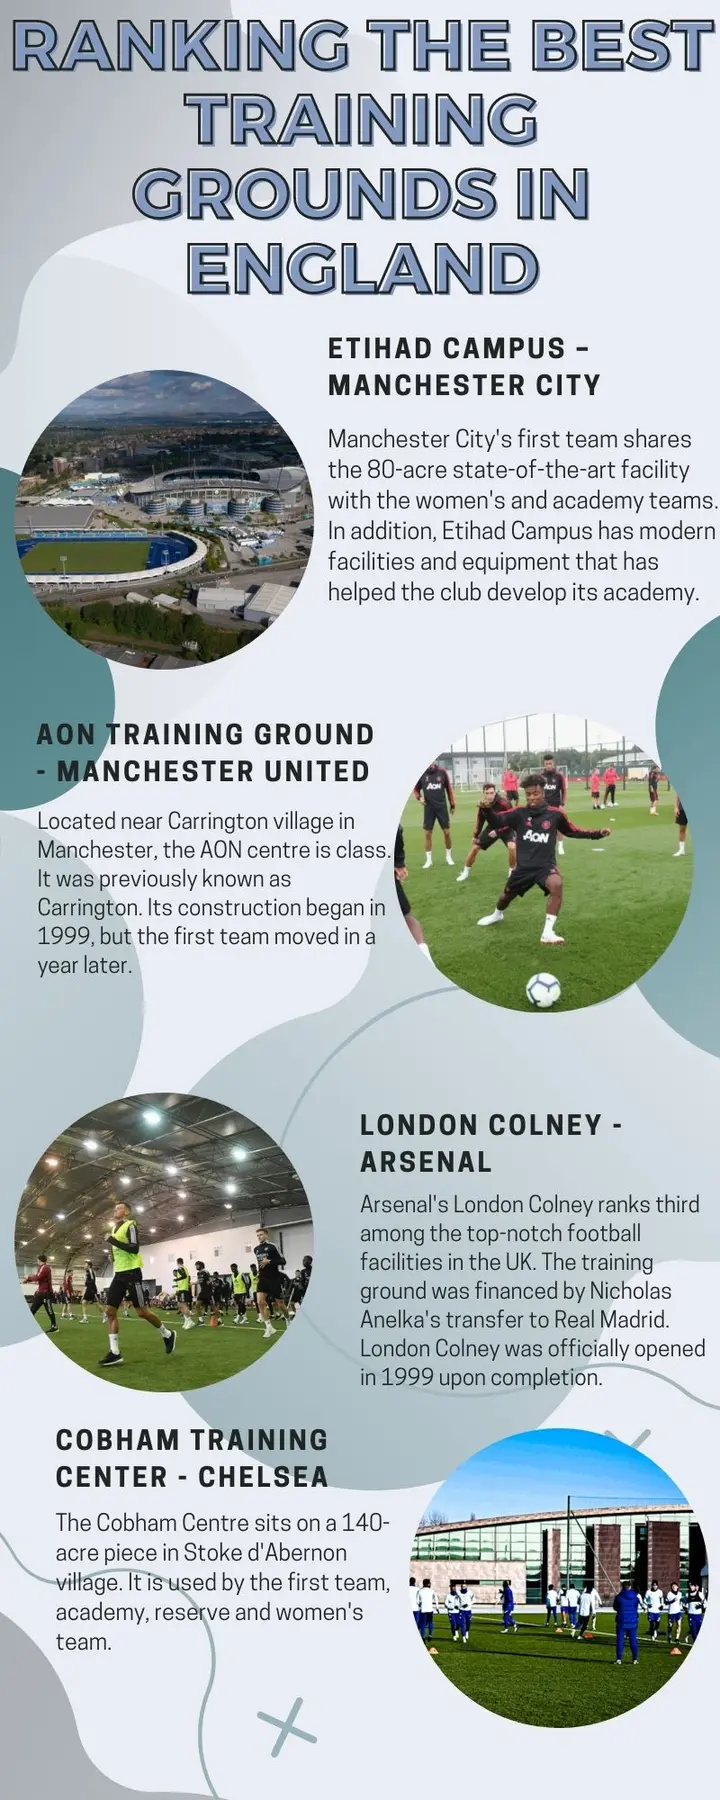 Ranking the best training grounds in England